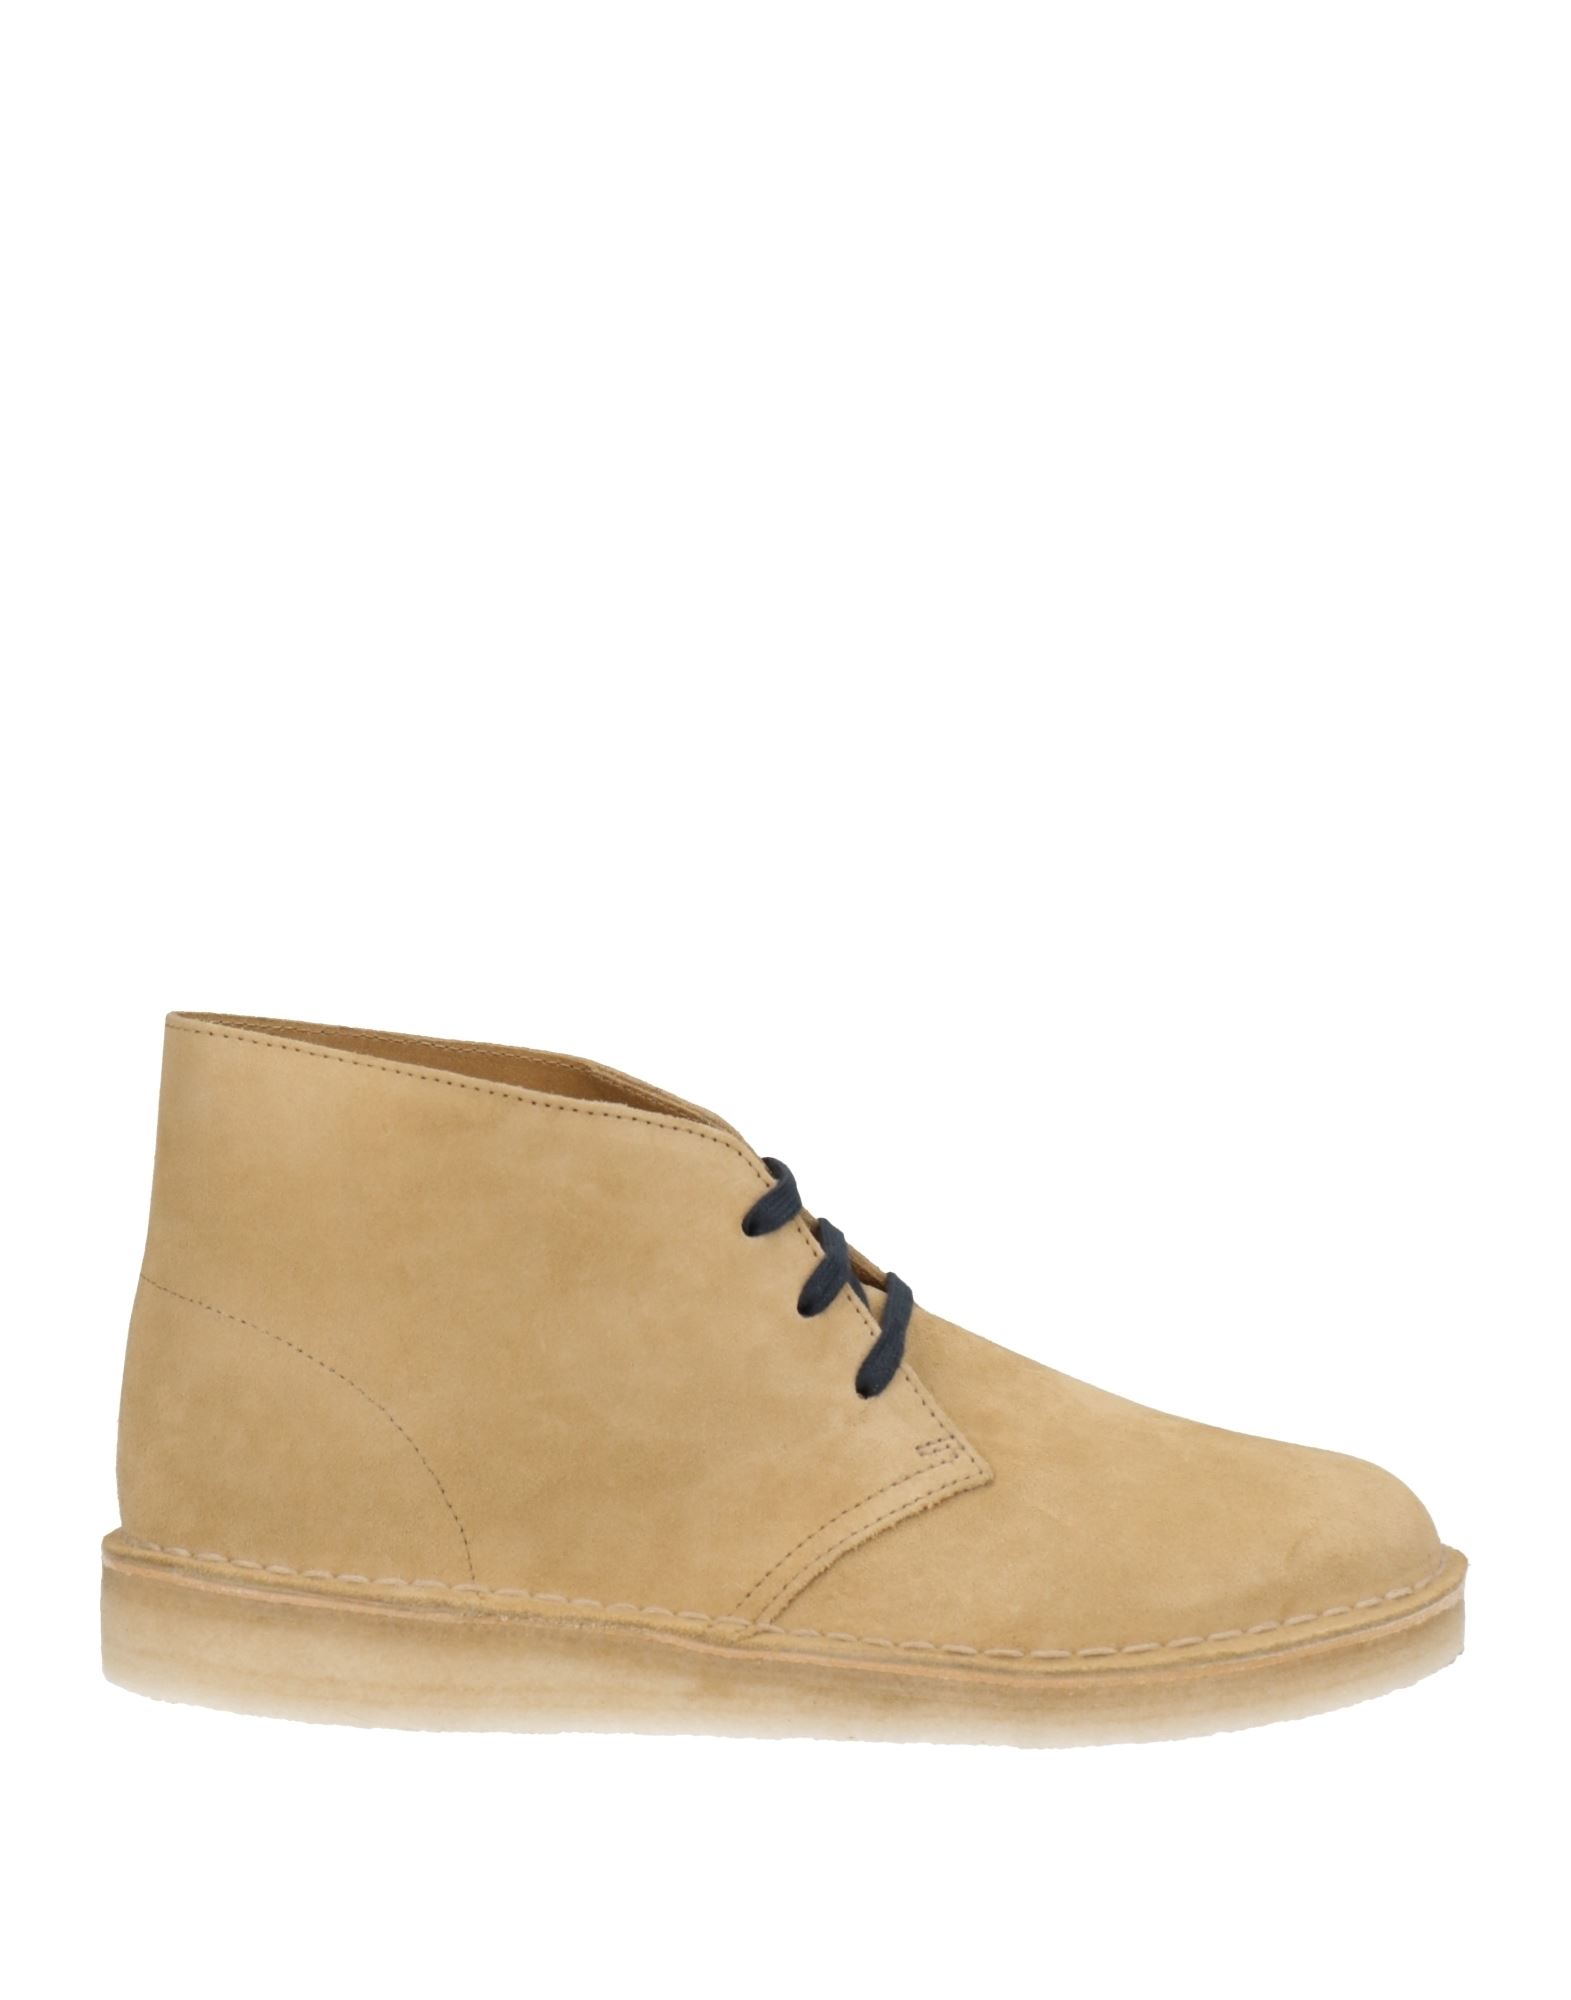 Clarks Originals Ankle Boots In Sand